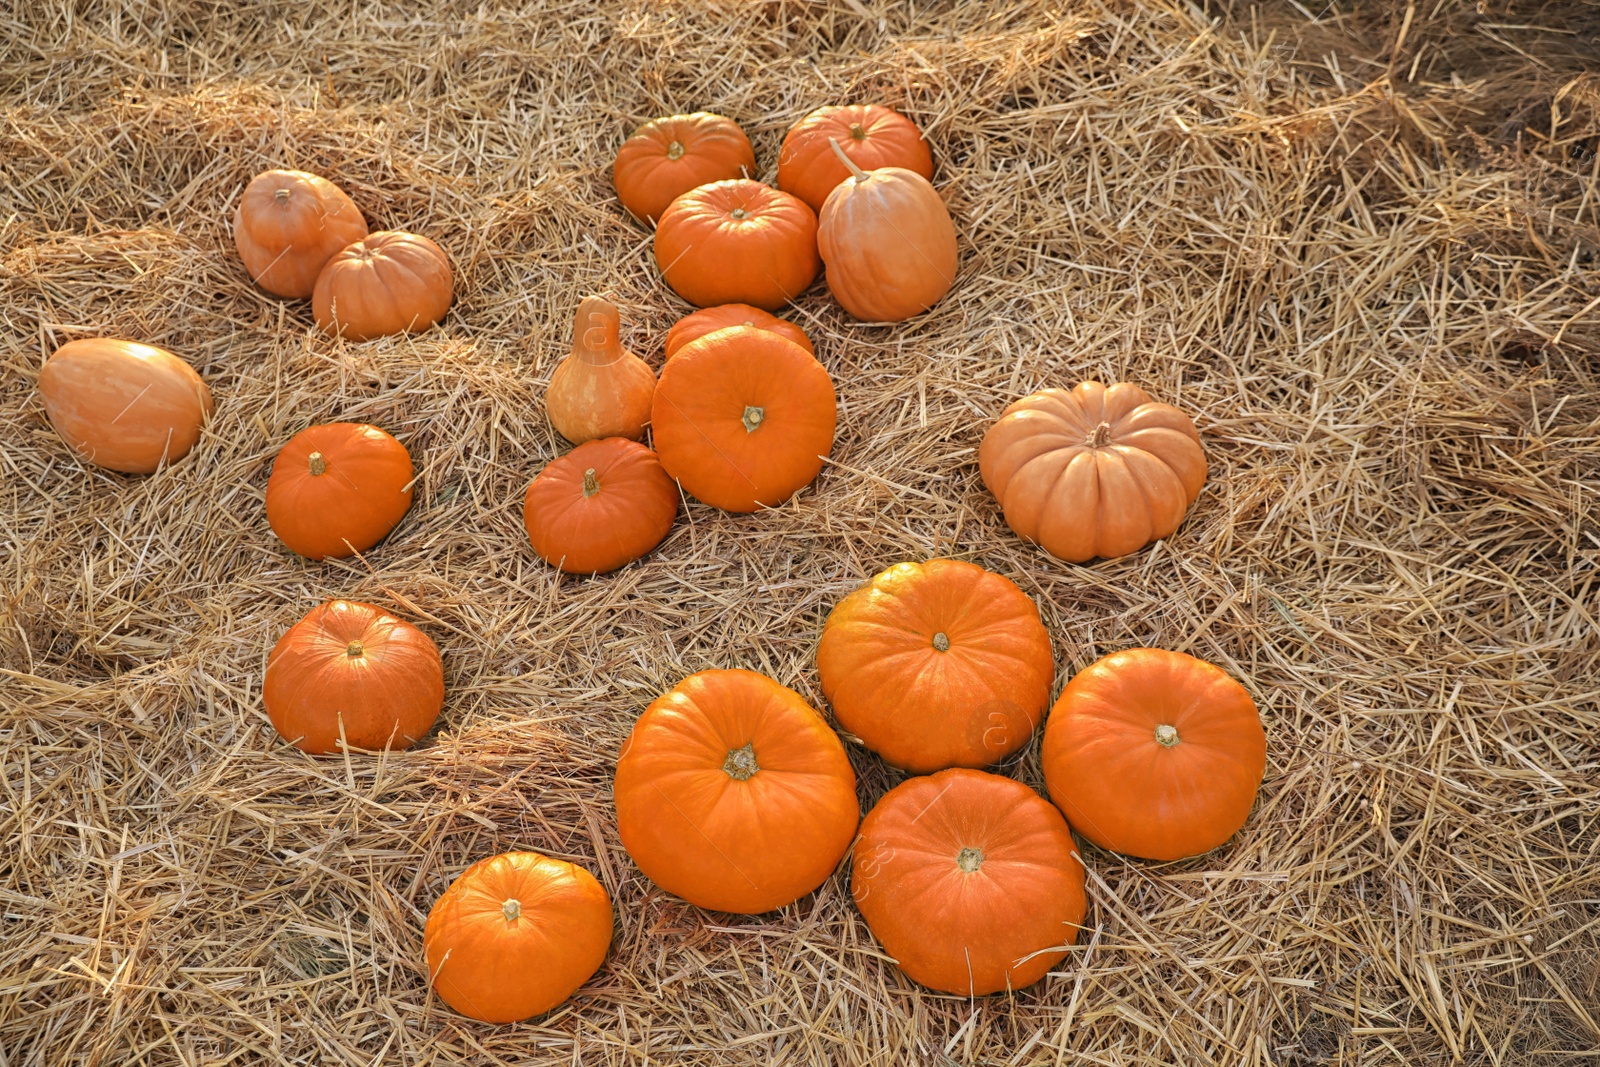 Photo of Ripe orange pumpkins among straw in field, above view